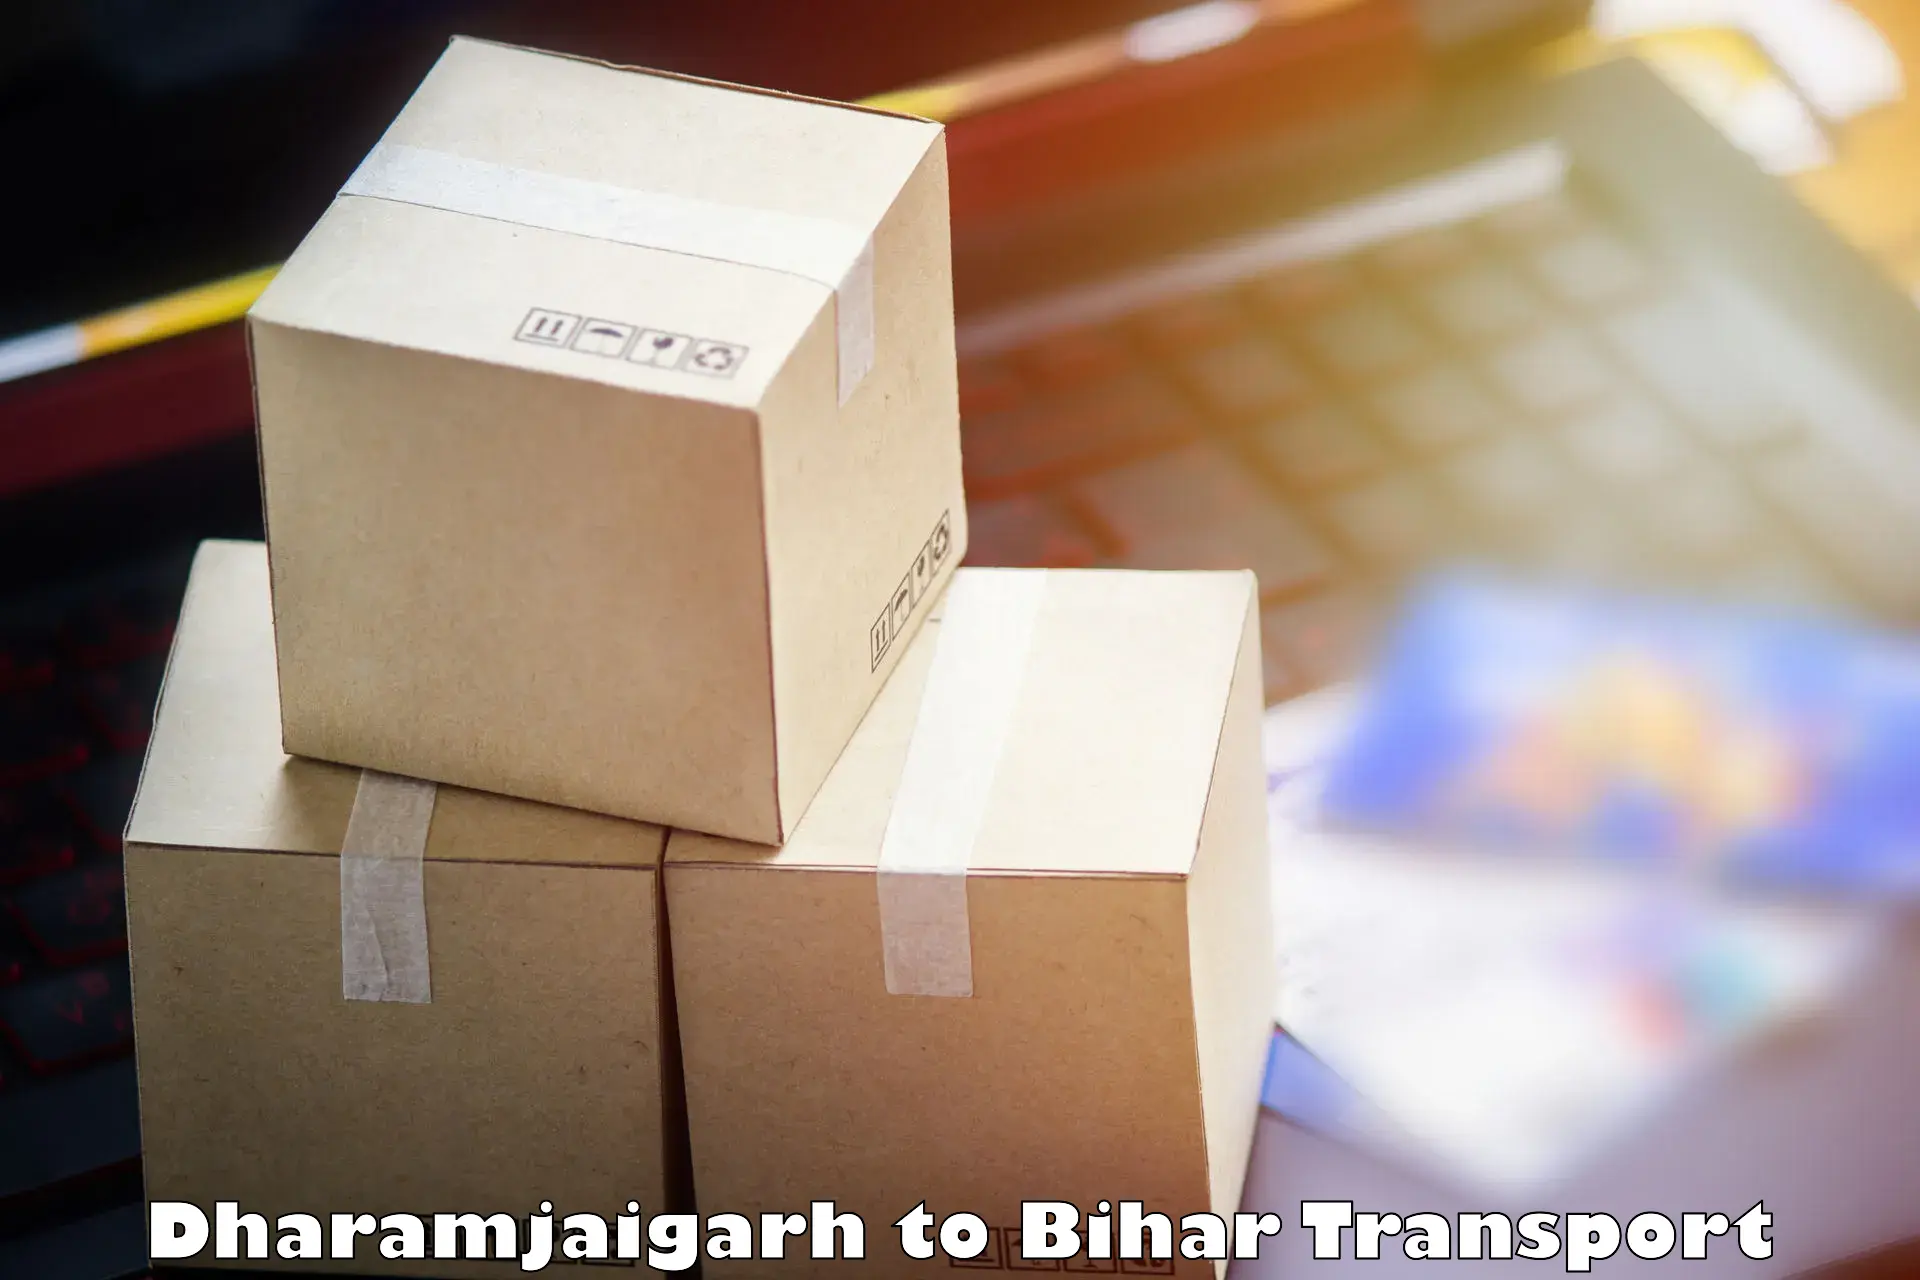 Truck transport companies in India Dharamjaigarh to Ghanshyampur